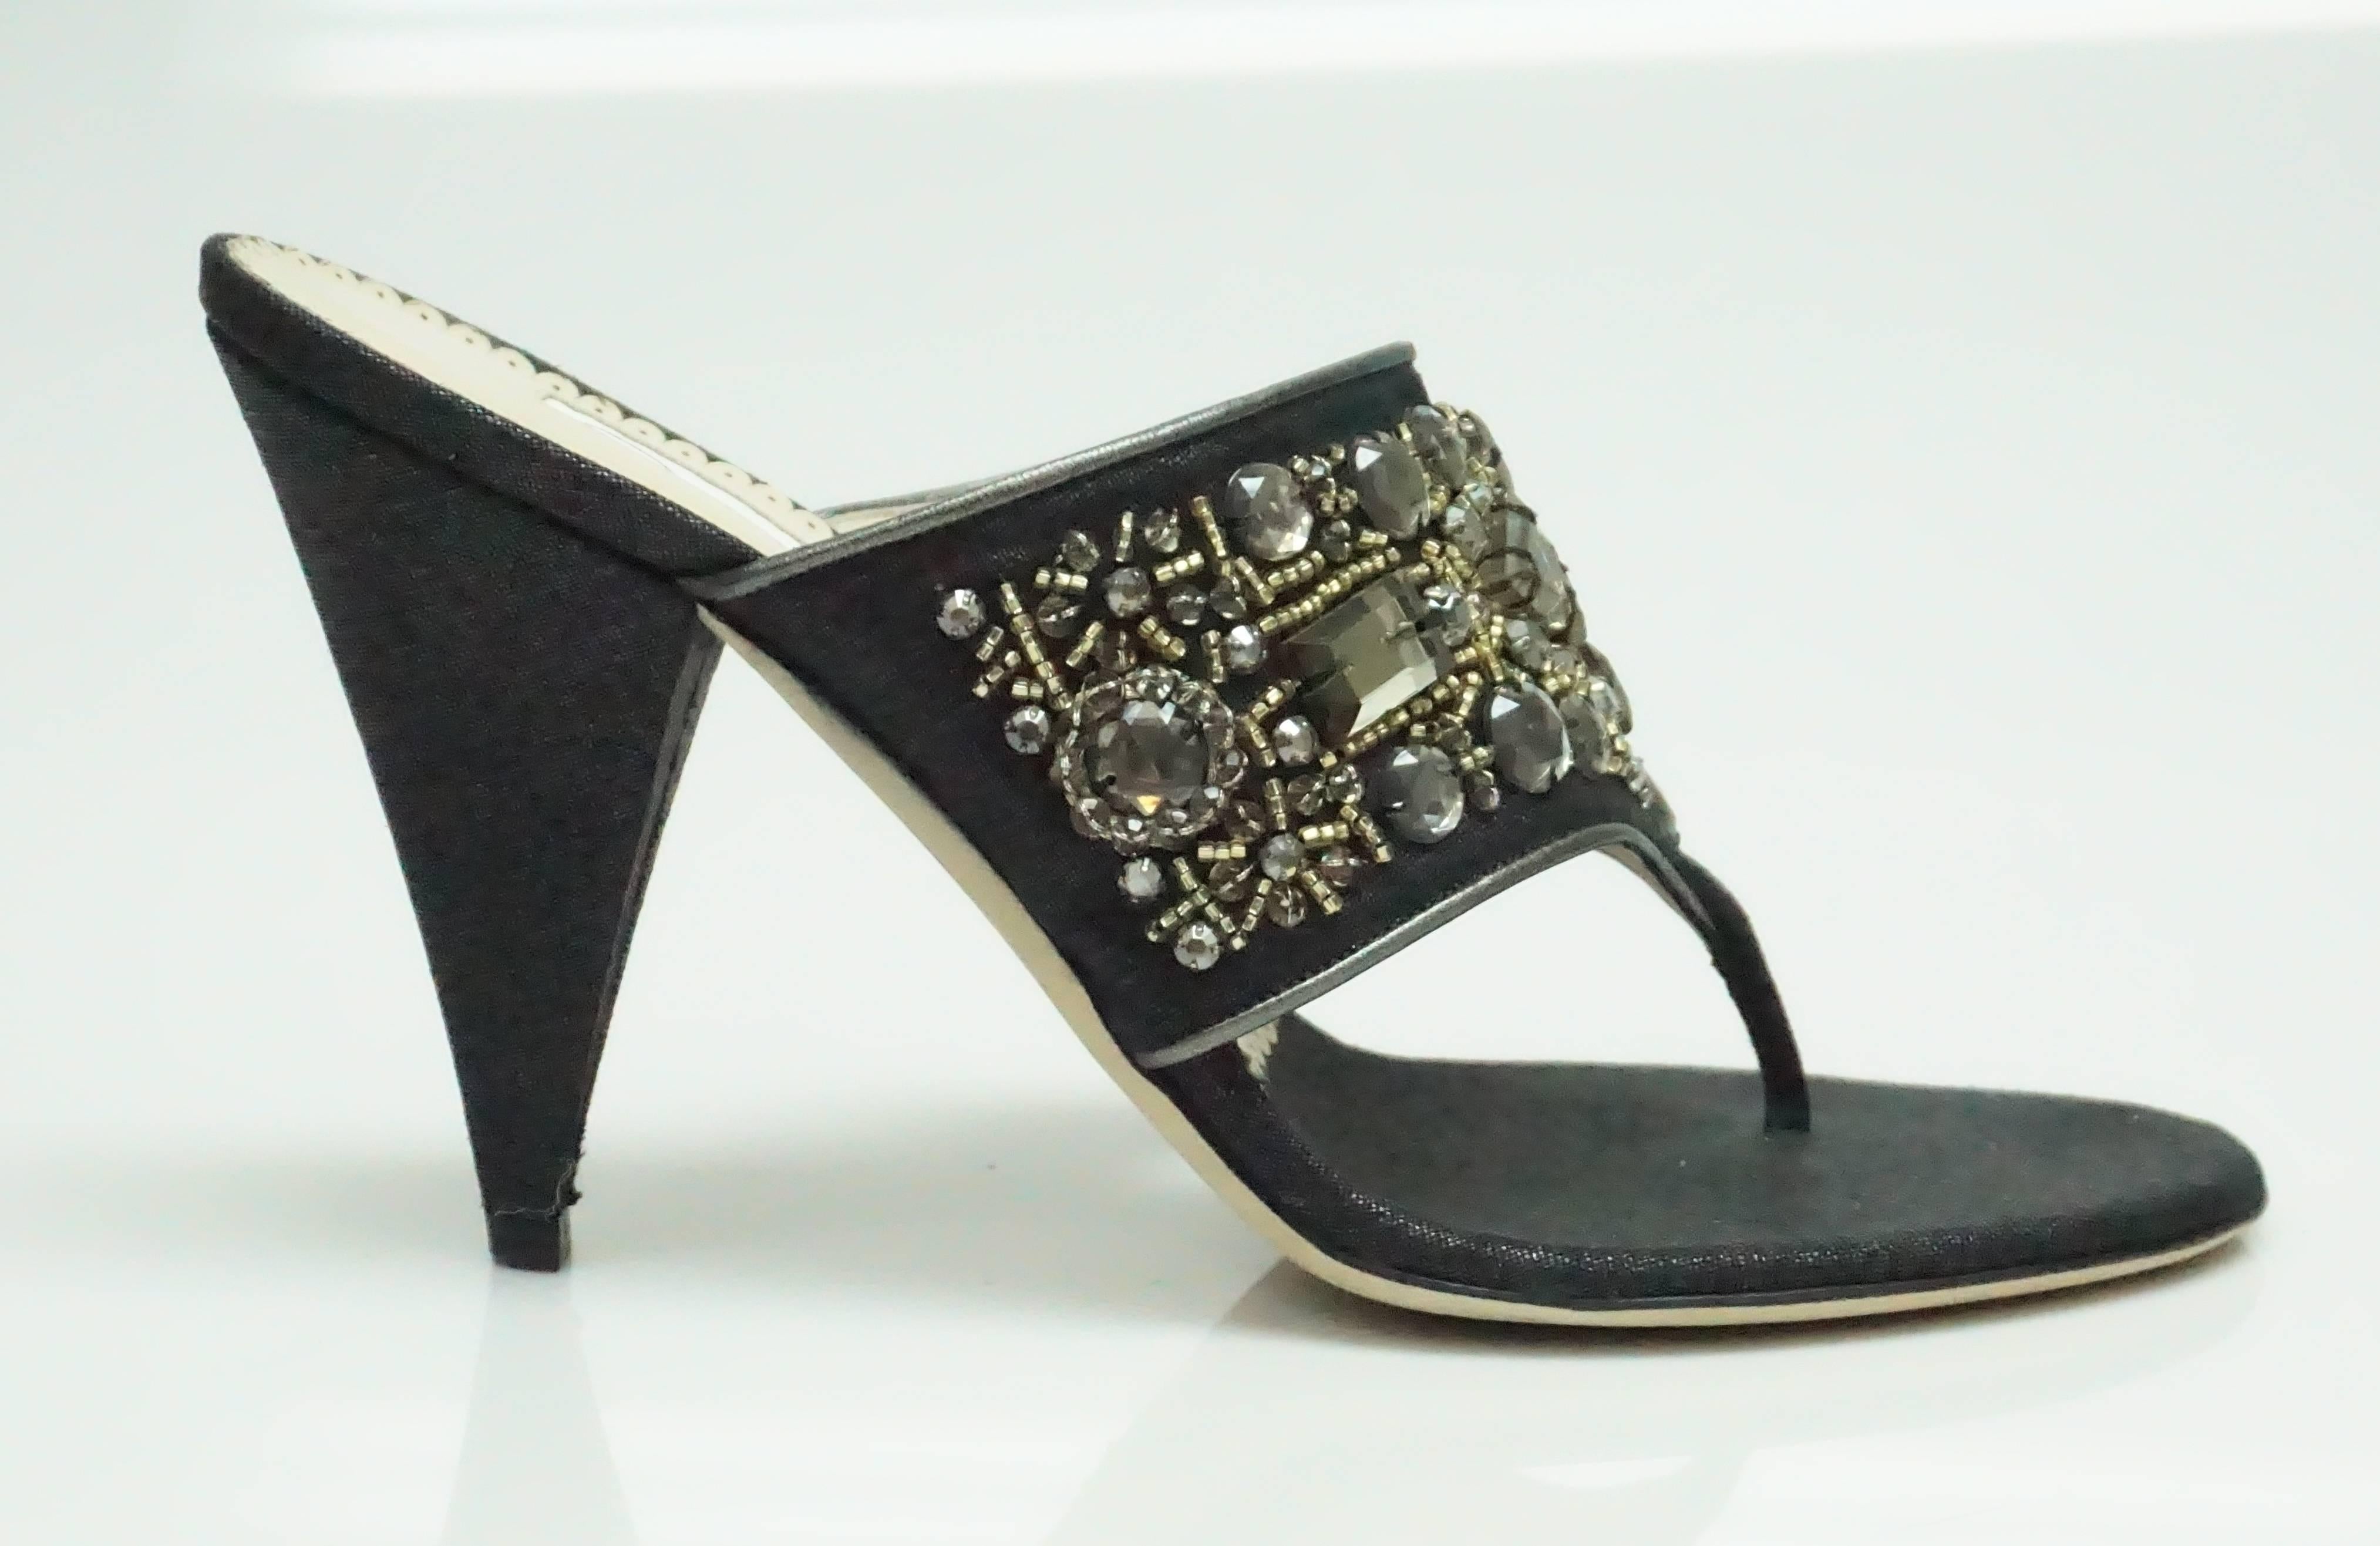 Oscar De La Renta Black Linen High Heel Thong Strap - 38.5   These unique linen sandals are in excellent condition. The shoes have a thong strap that has a thicker band. The band is embellished with different rhinestones and beads. The heel is a